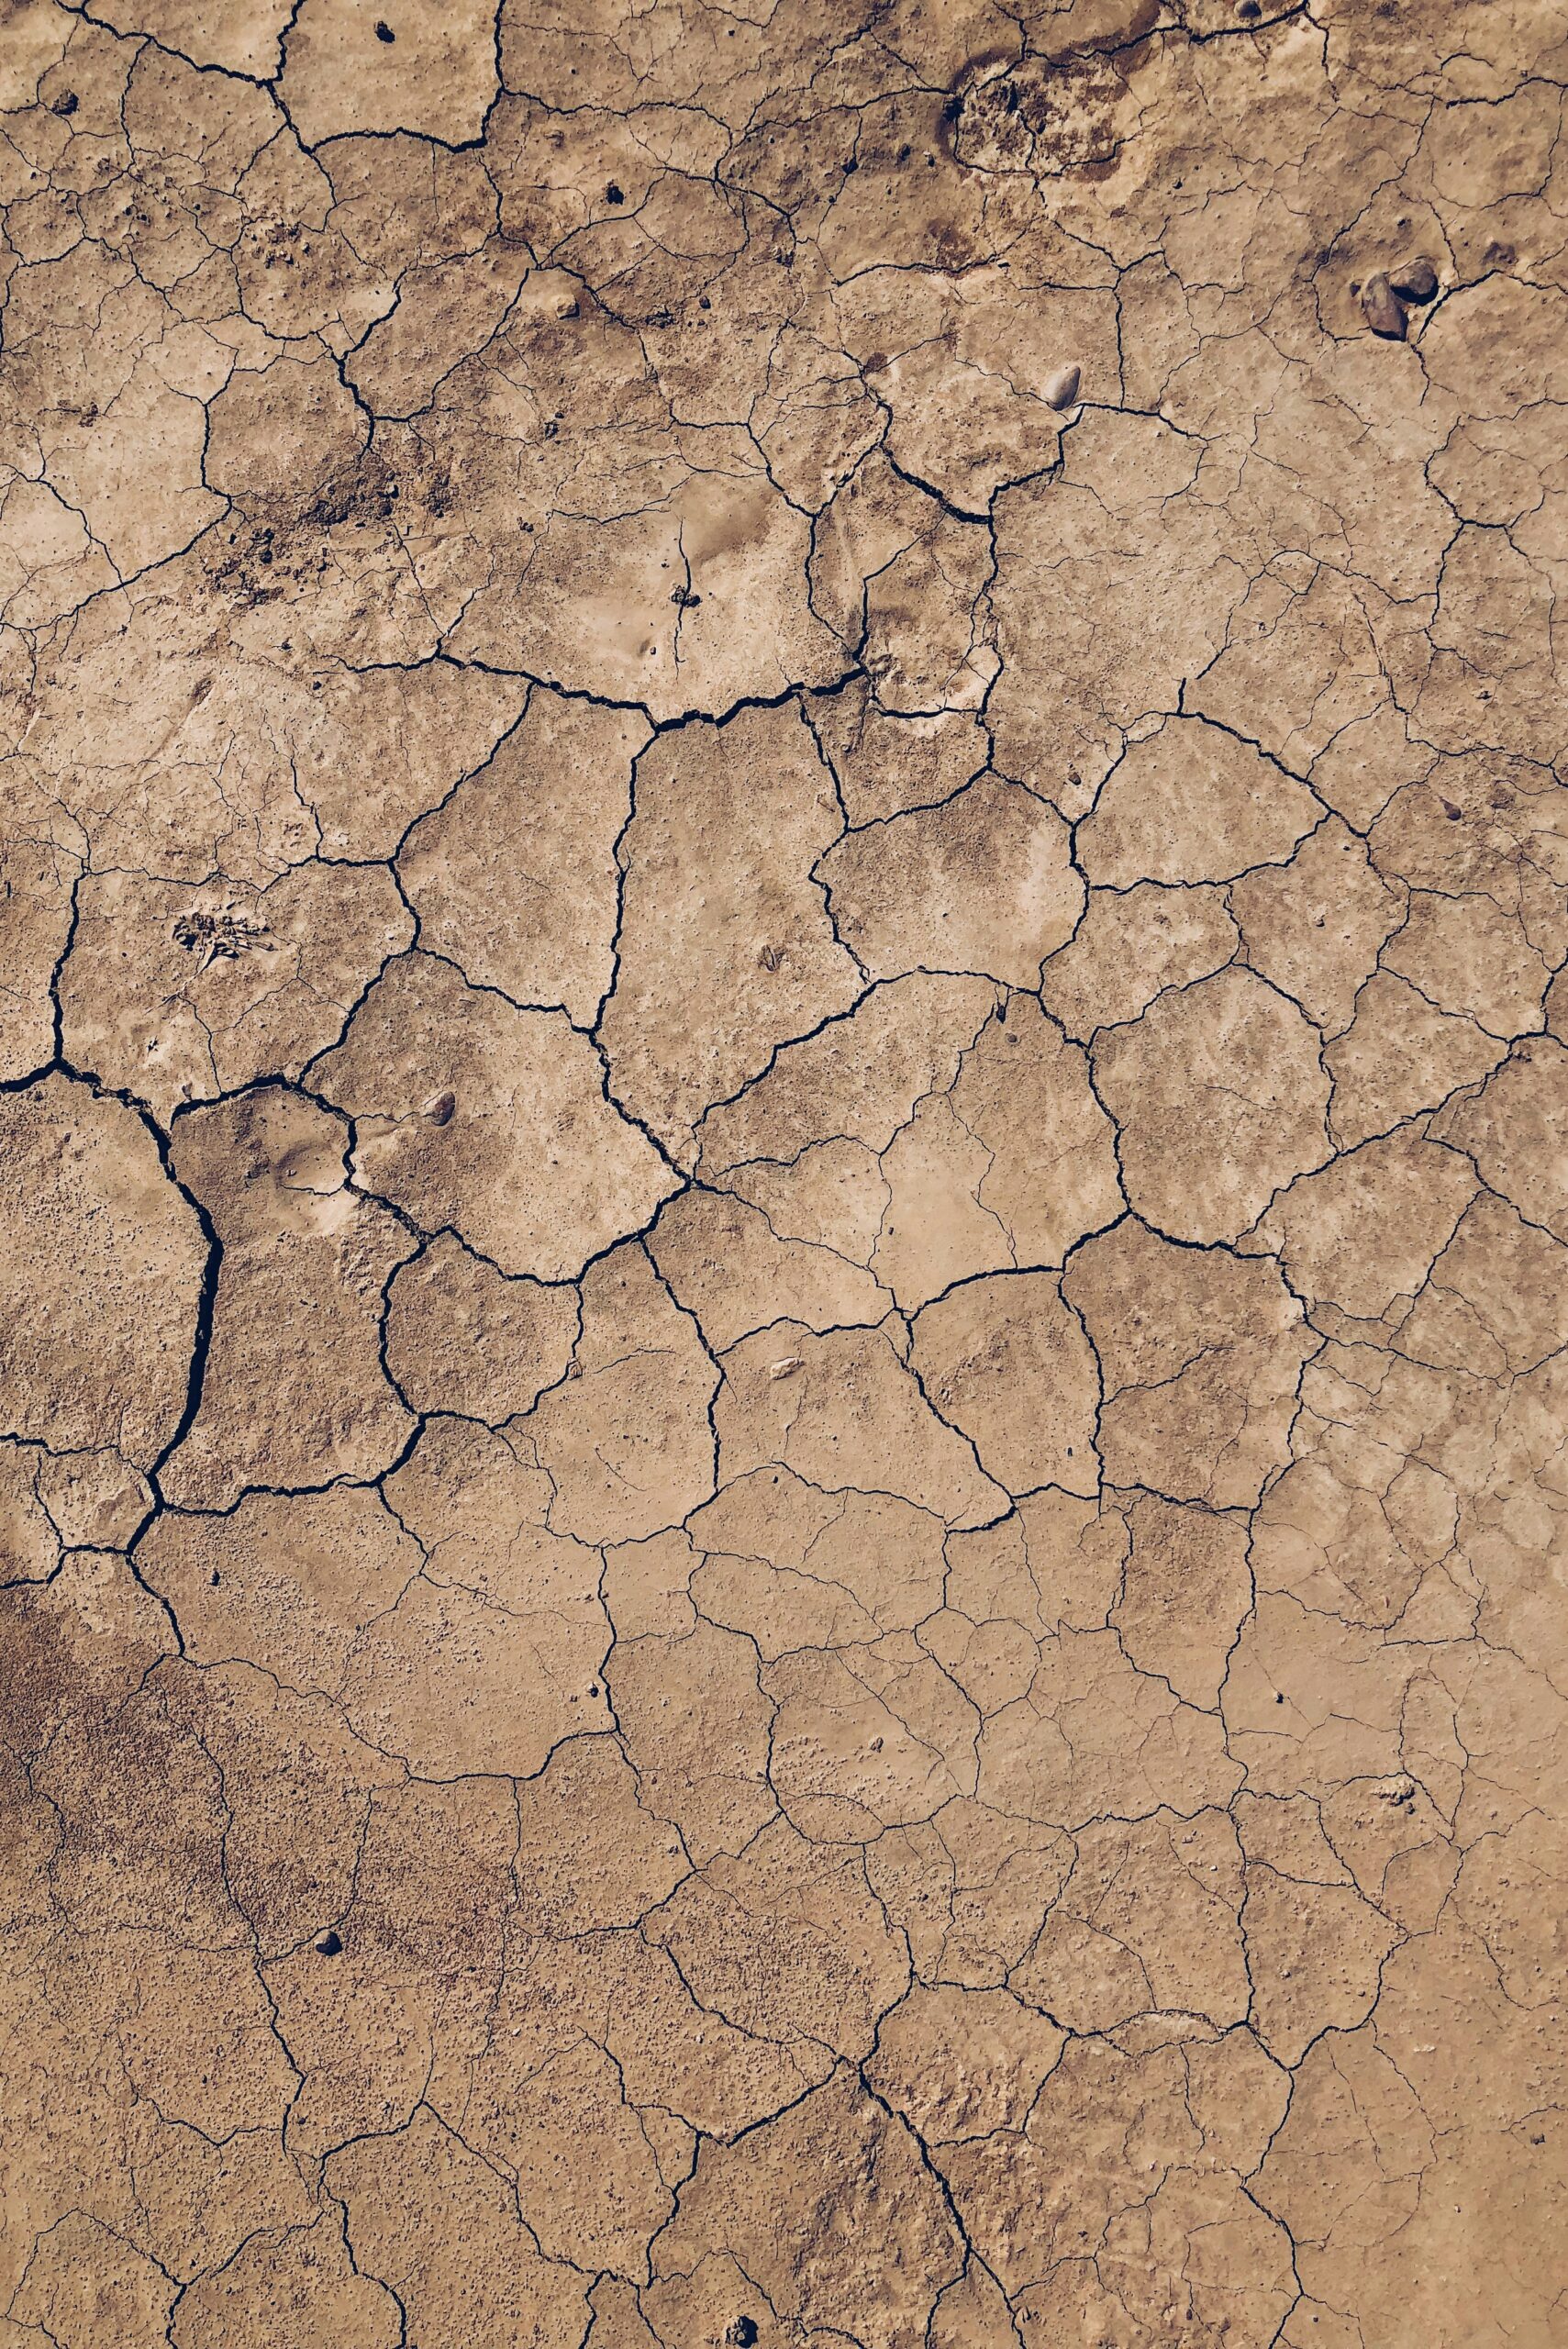 How Should I Prepare For A Severe Drought Emergency?